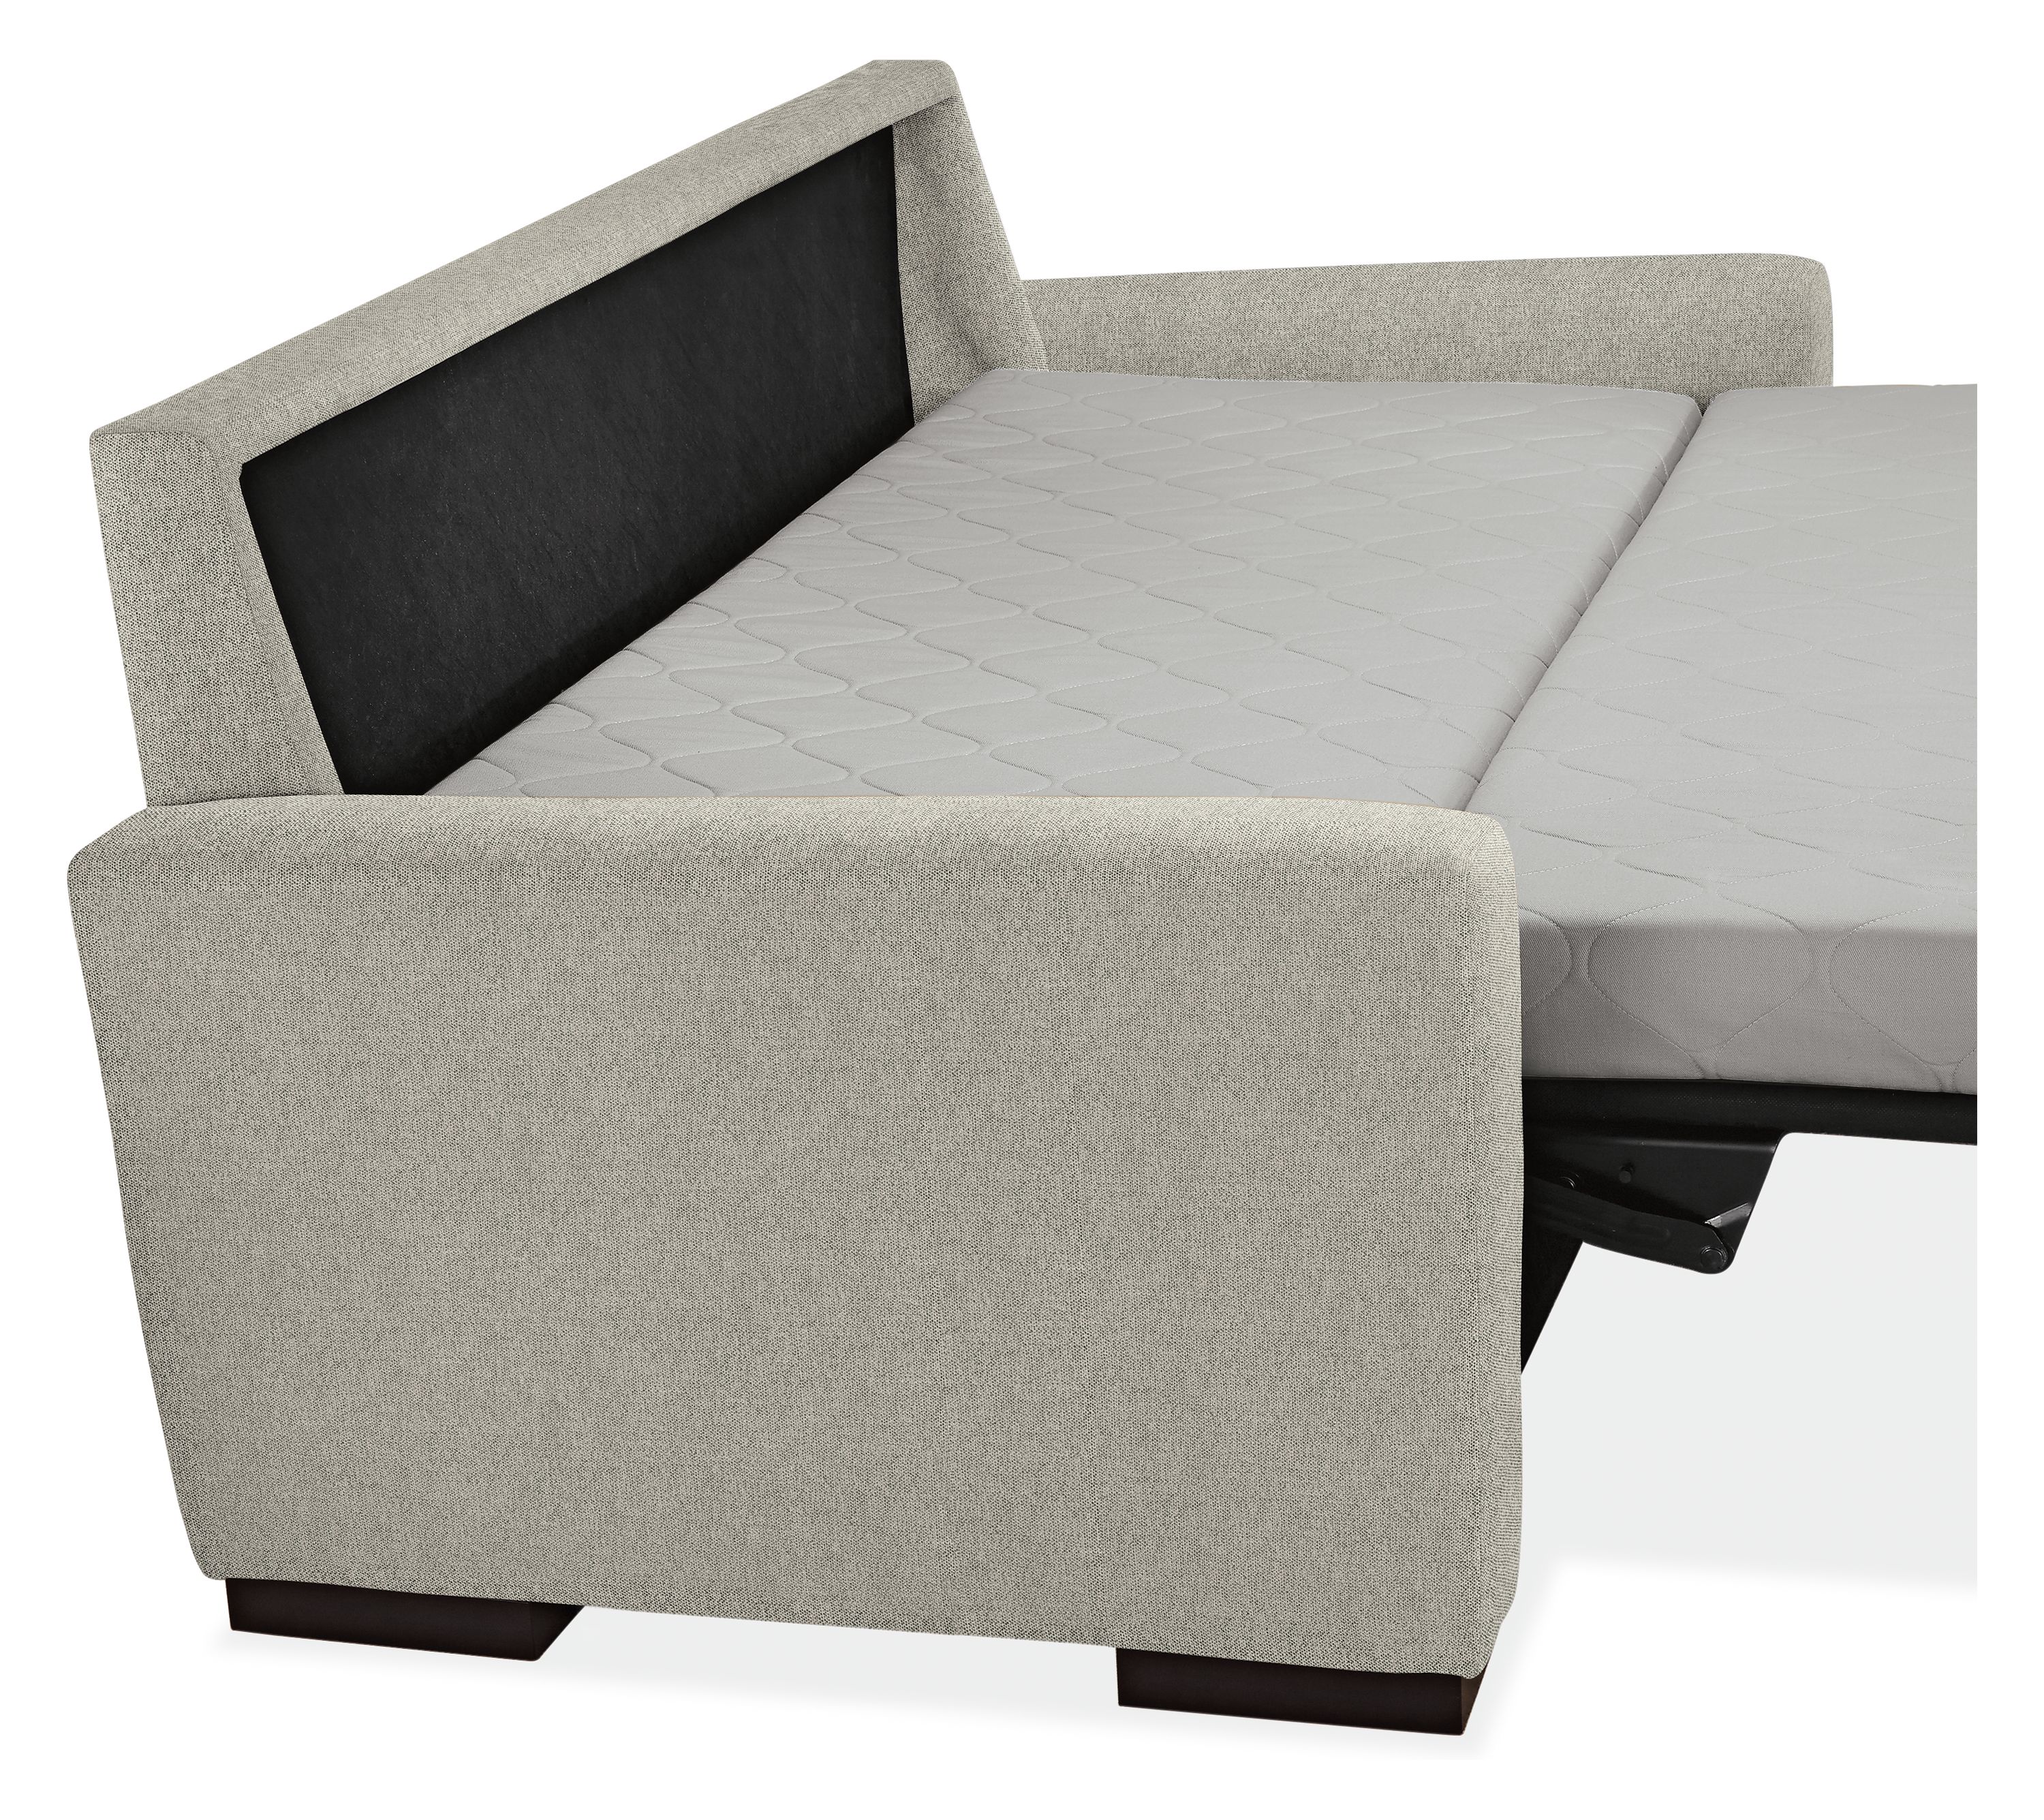 Angled side view of Berin sleeper sofa mattress in open position.